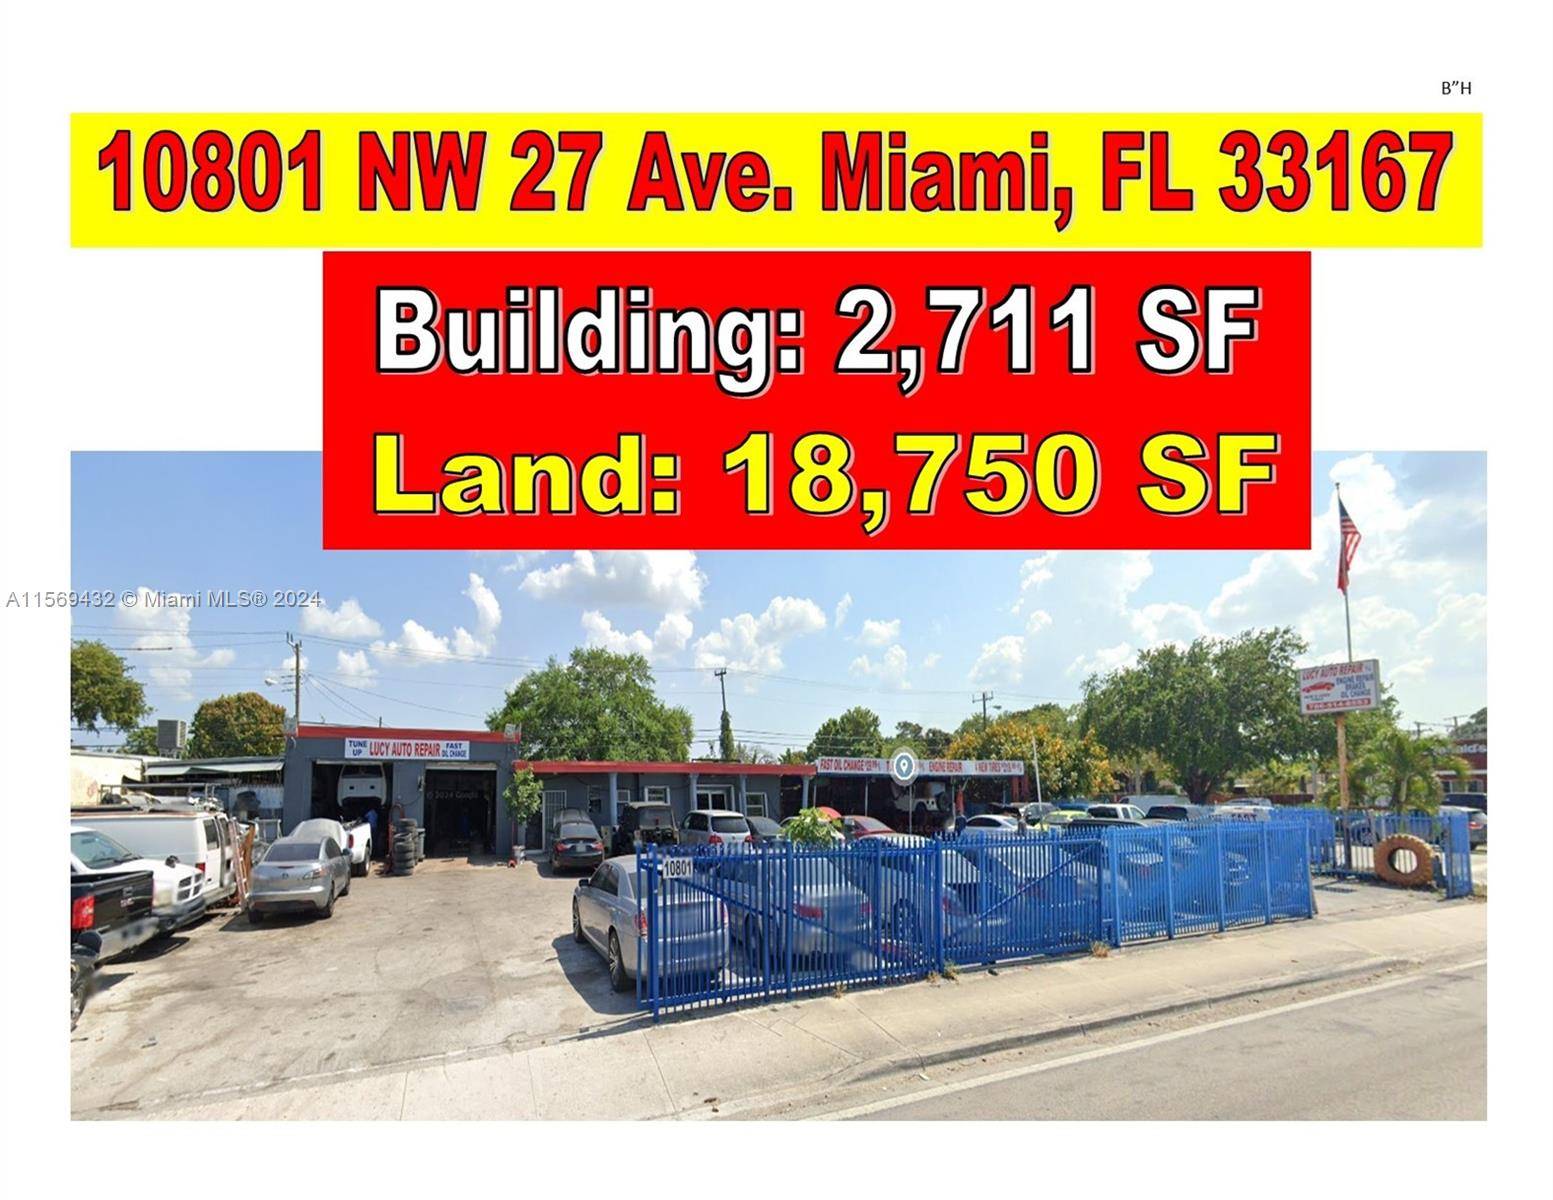 Location, Location, Location 18, 750 SF Lot in one of the Best Corners in NW 27 Avenue, next to Mc Donald's Redevelopment Opportunity Site.